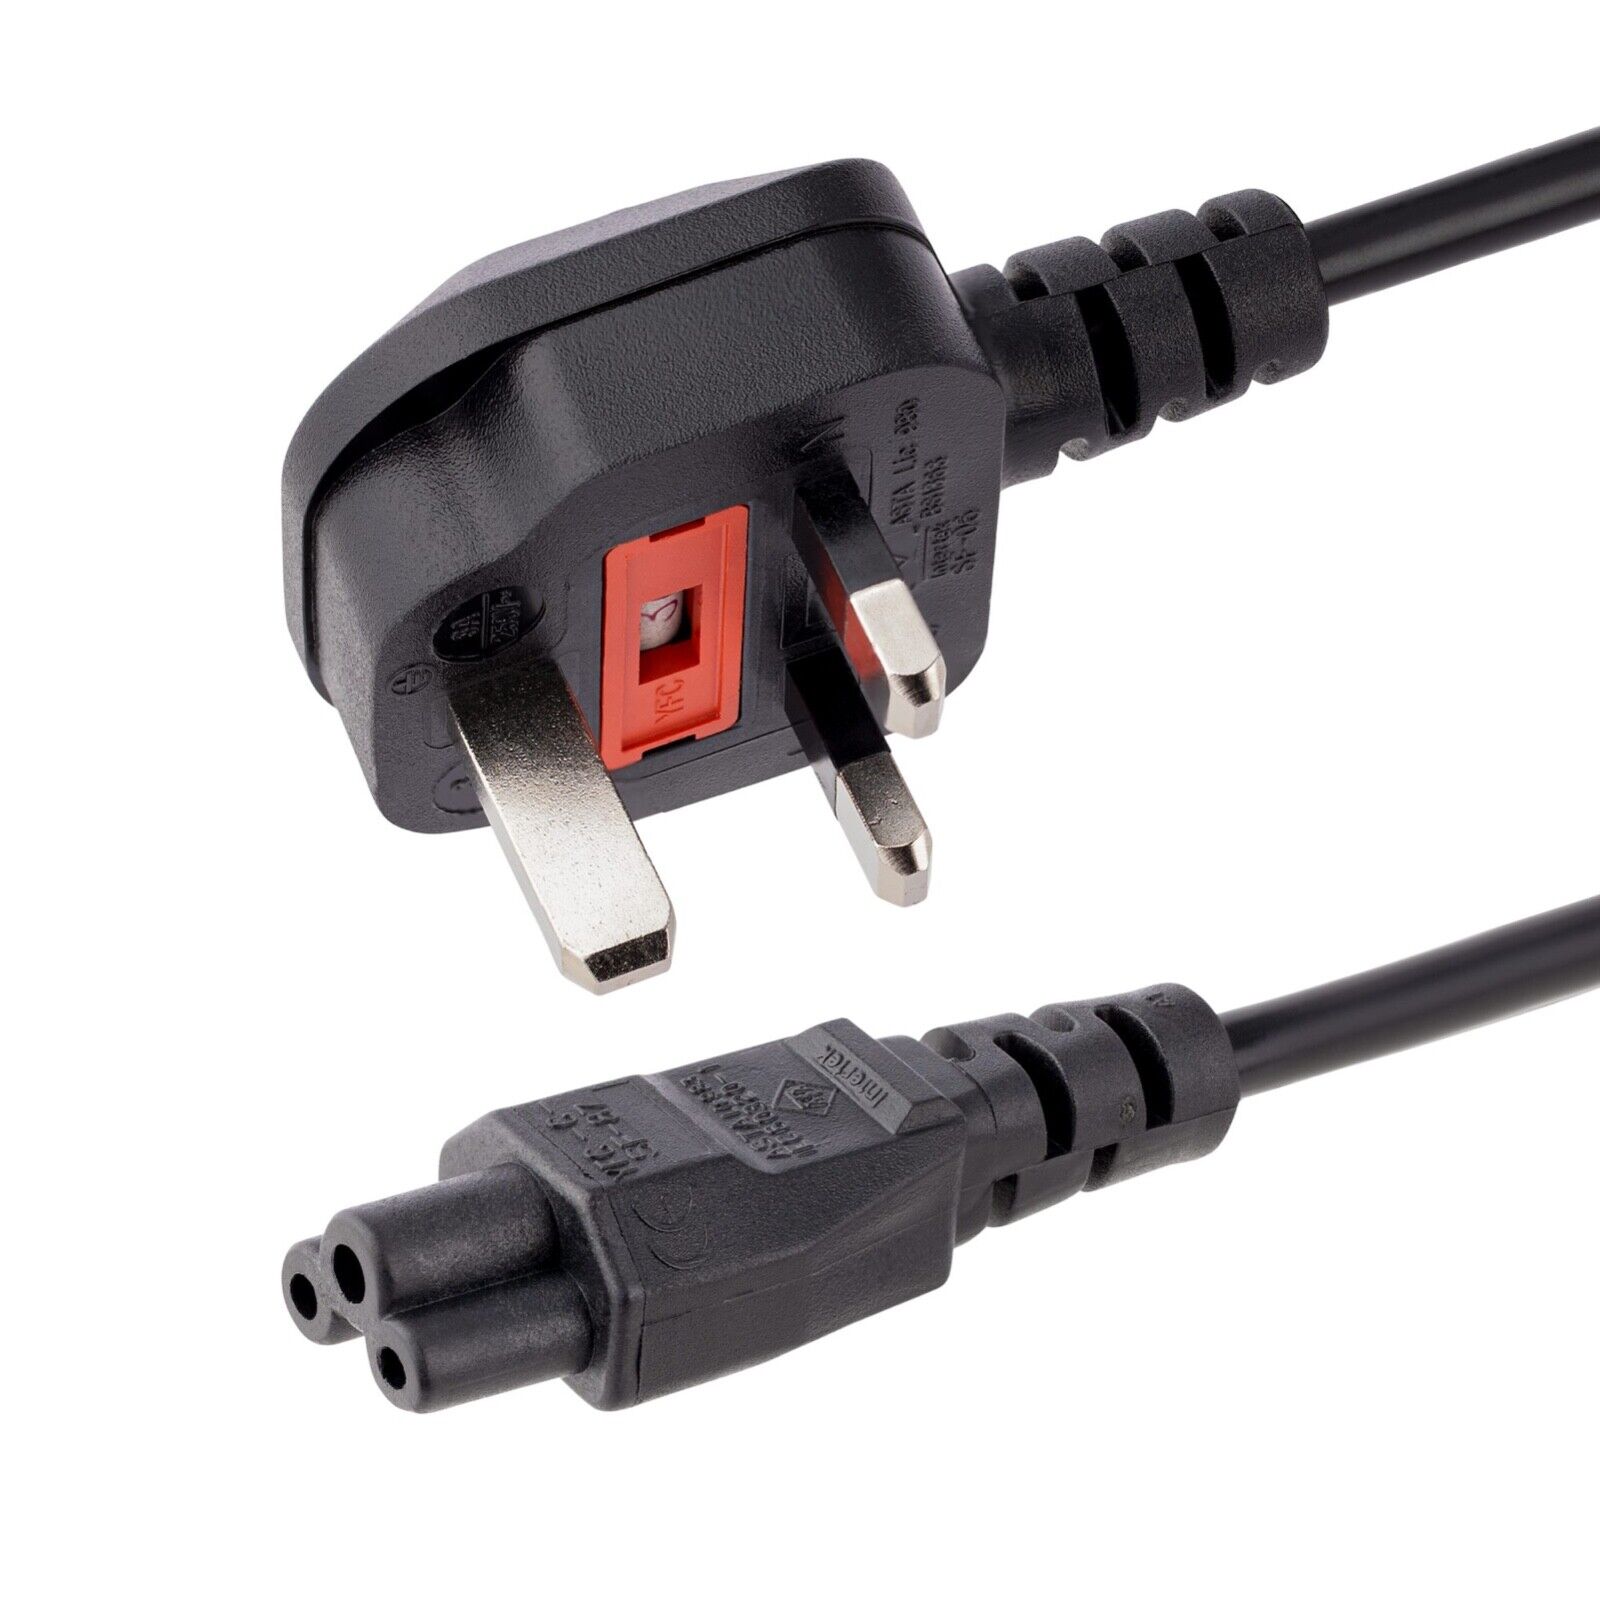 UK 6 FT POWER SUPPLY CORD CABLE